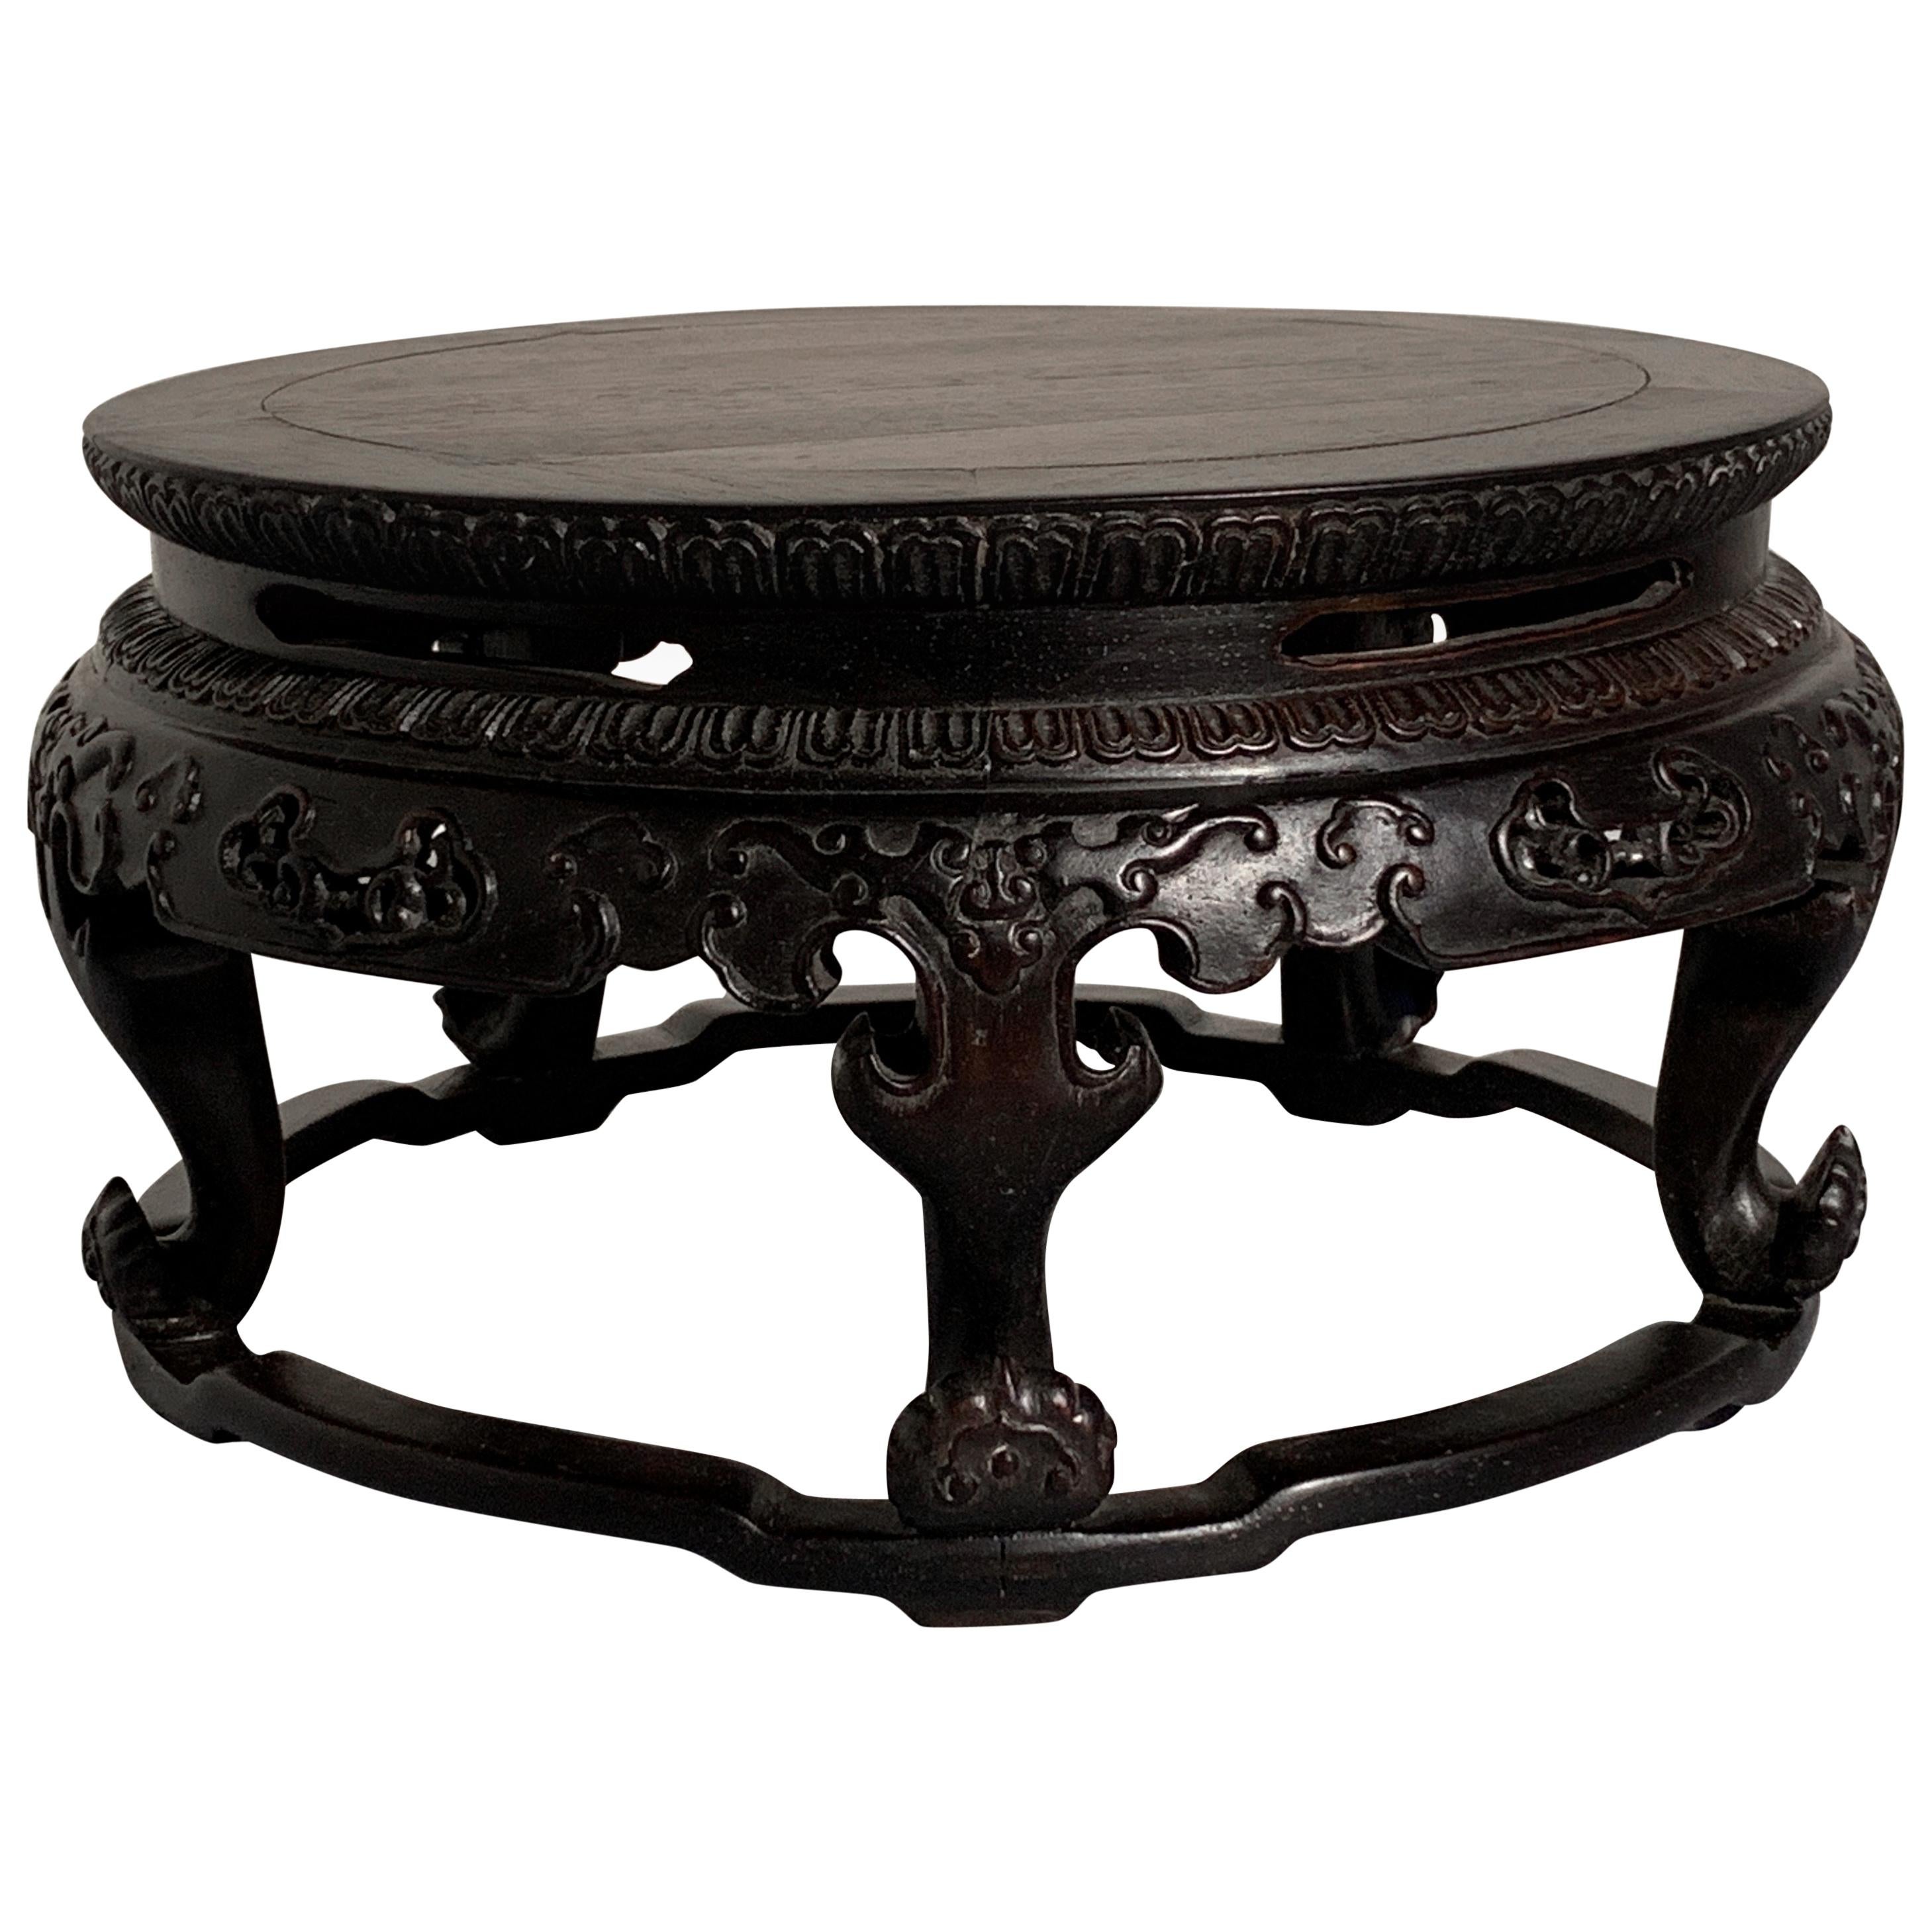 Chinese Carved Zitan Table-Form Stand, Republic Period, Mid-20th Century